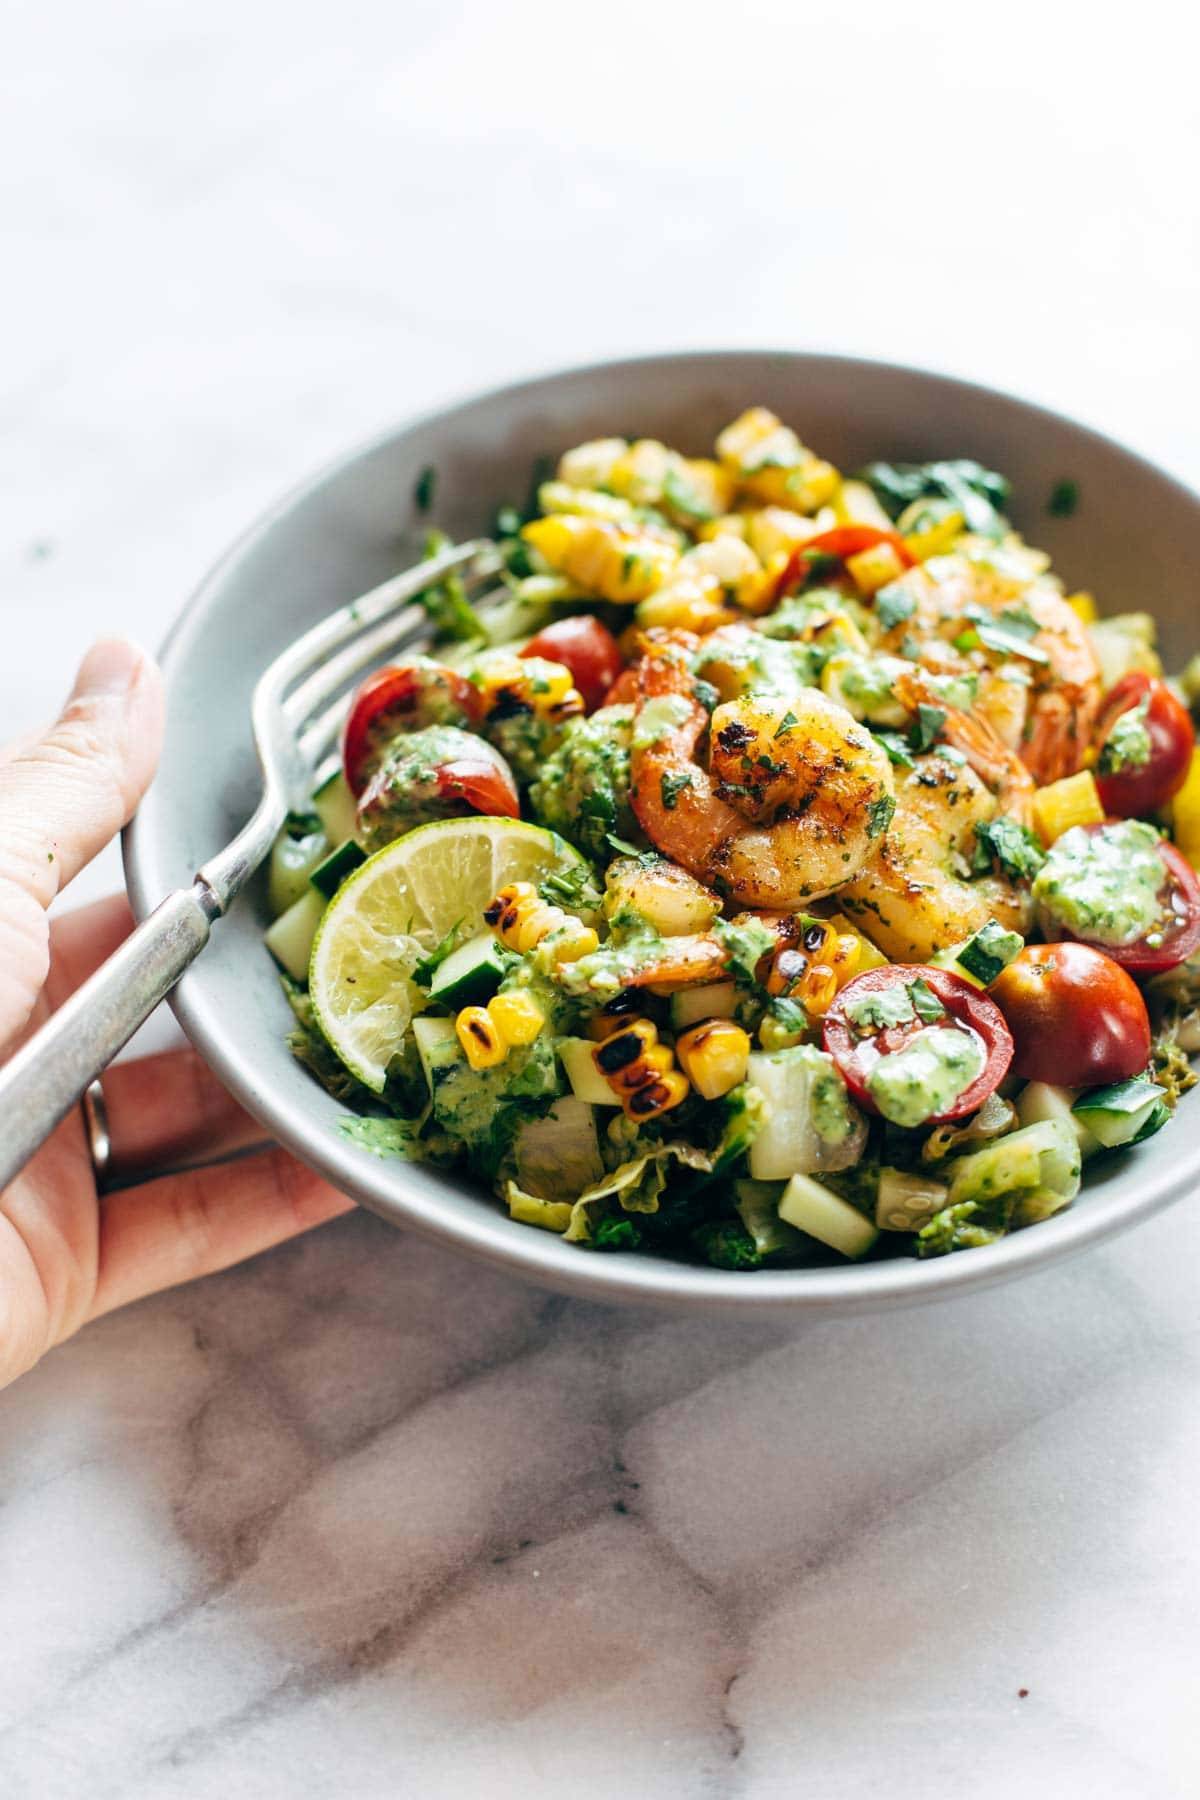 Glowing Grilled Summer Detox Salad! with grilled romaine, lime, tomato, cucumber, avocado, corn, shrimp, and cilantro dressing. | pinchofyum.com